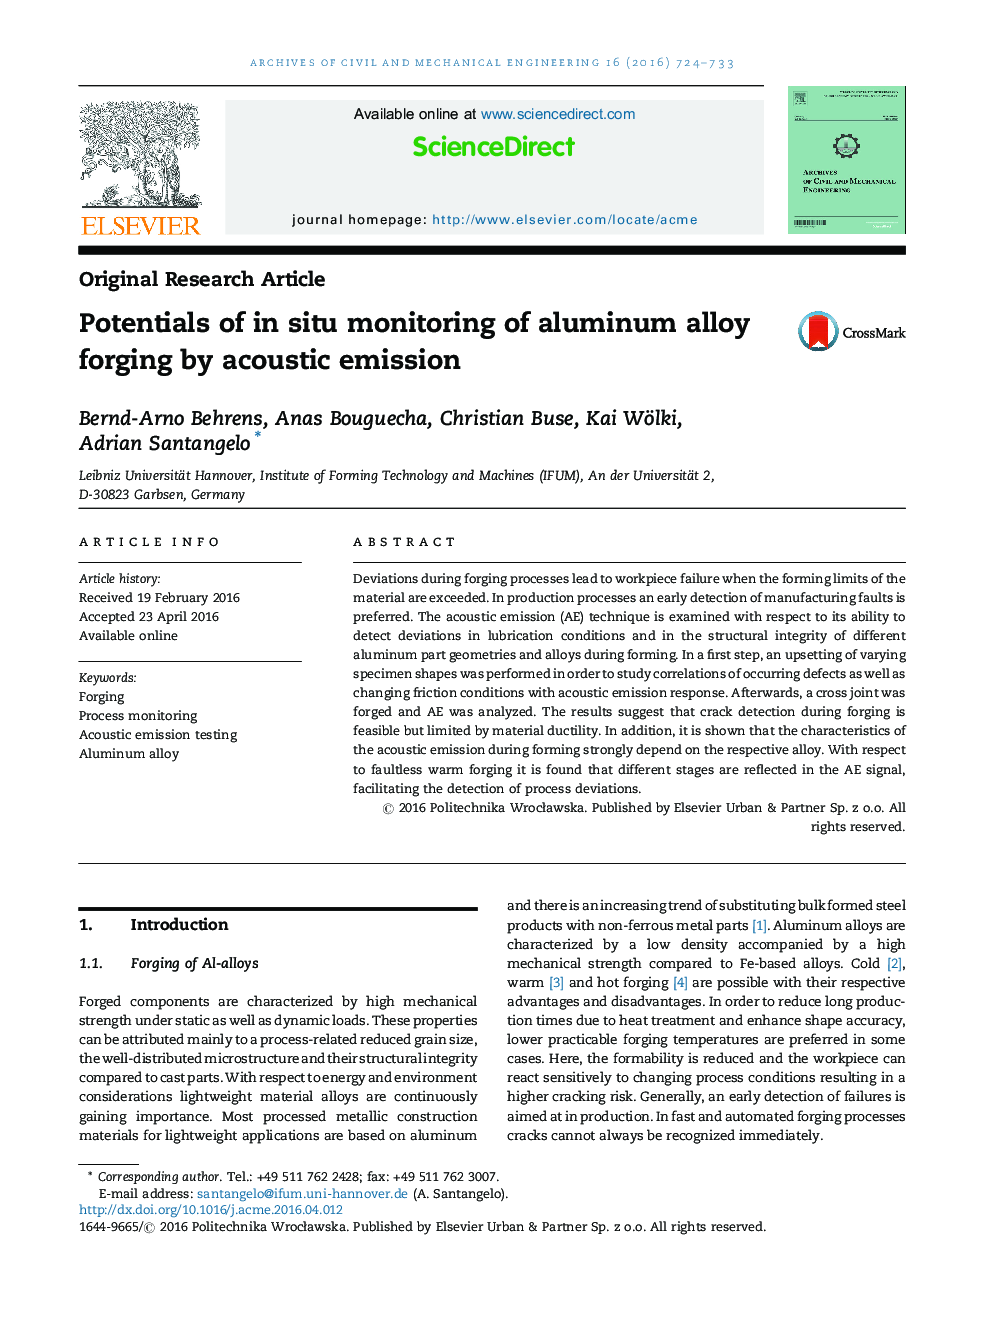 Potentials of in situ monitoring of aluminum alloy forging by acoustic emission